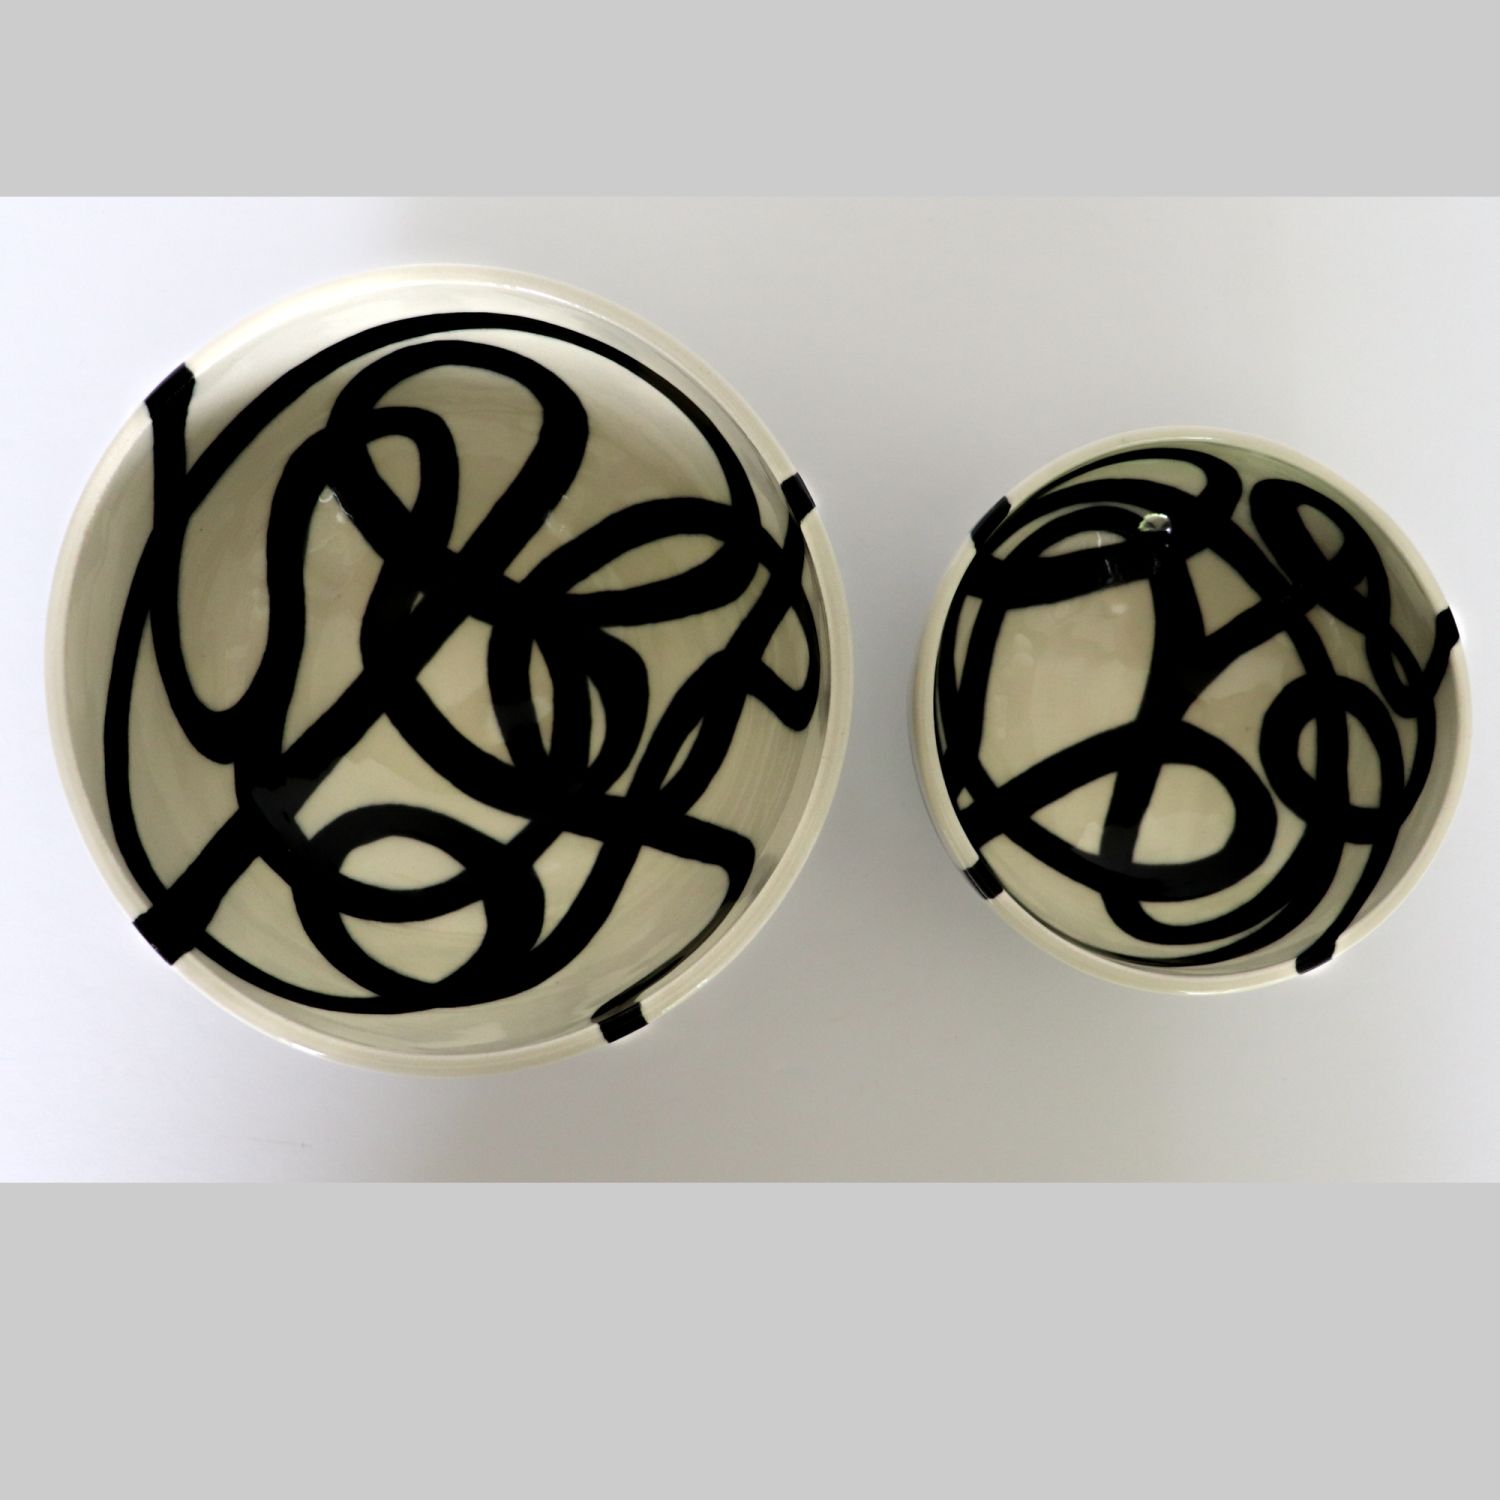 Alana Marcoccia: Interconnected Nesting Bowl – Small Product Image 2 of 9